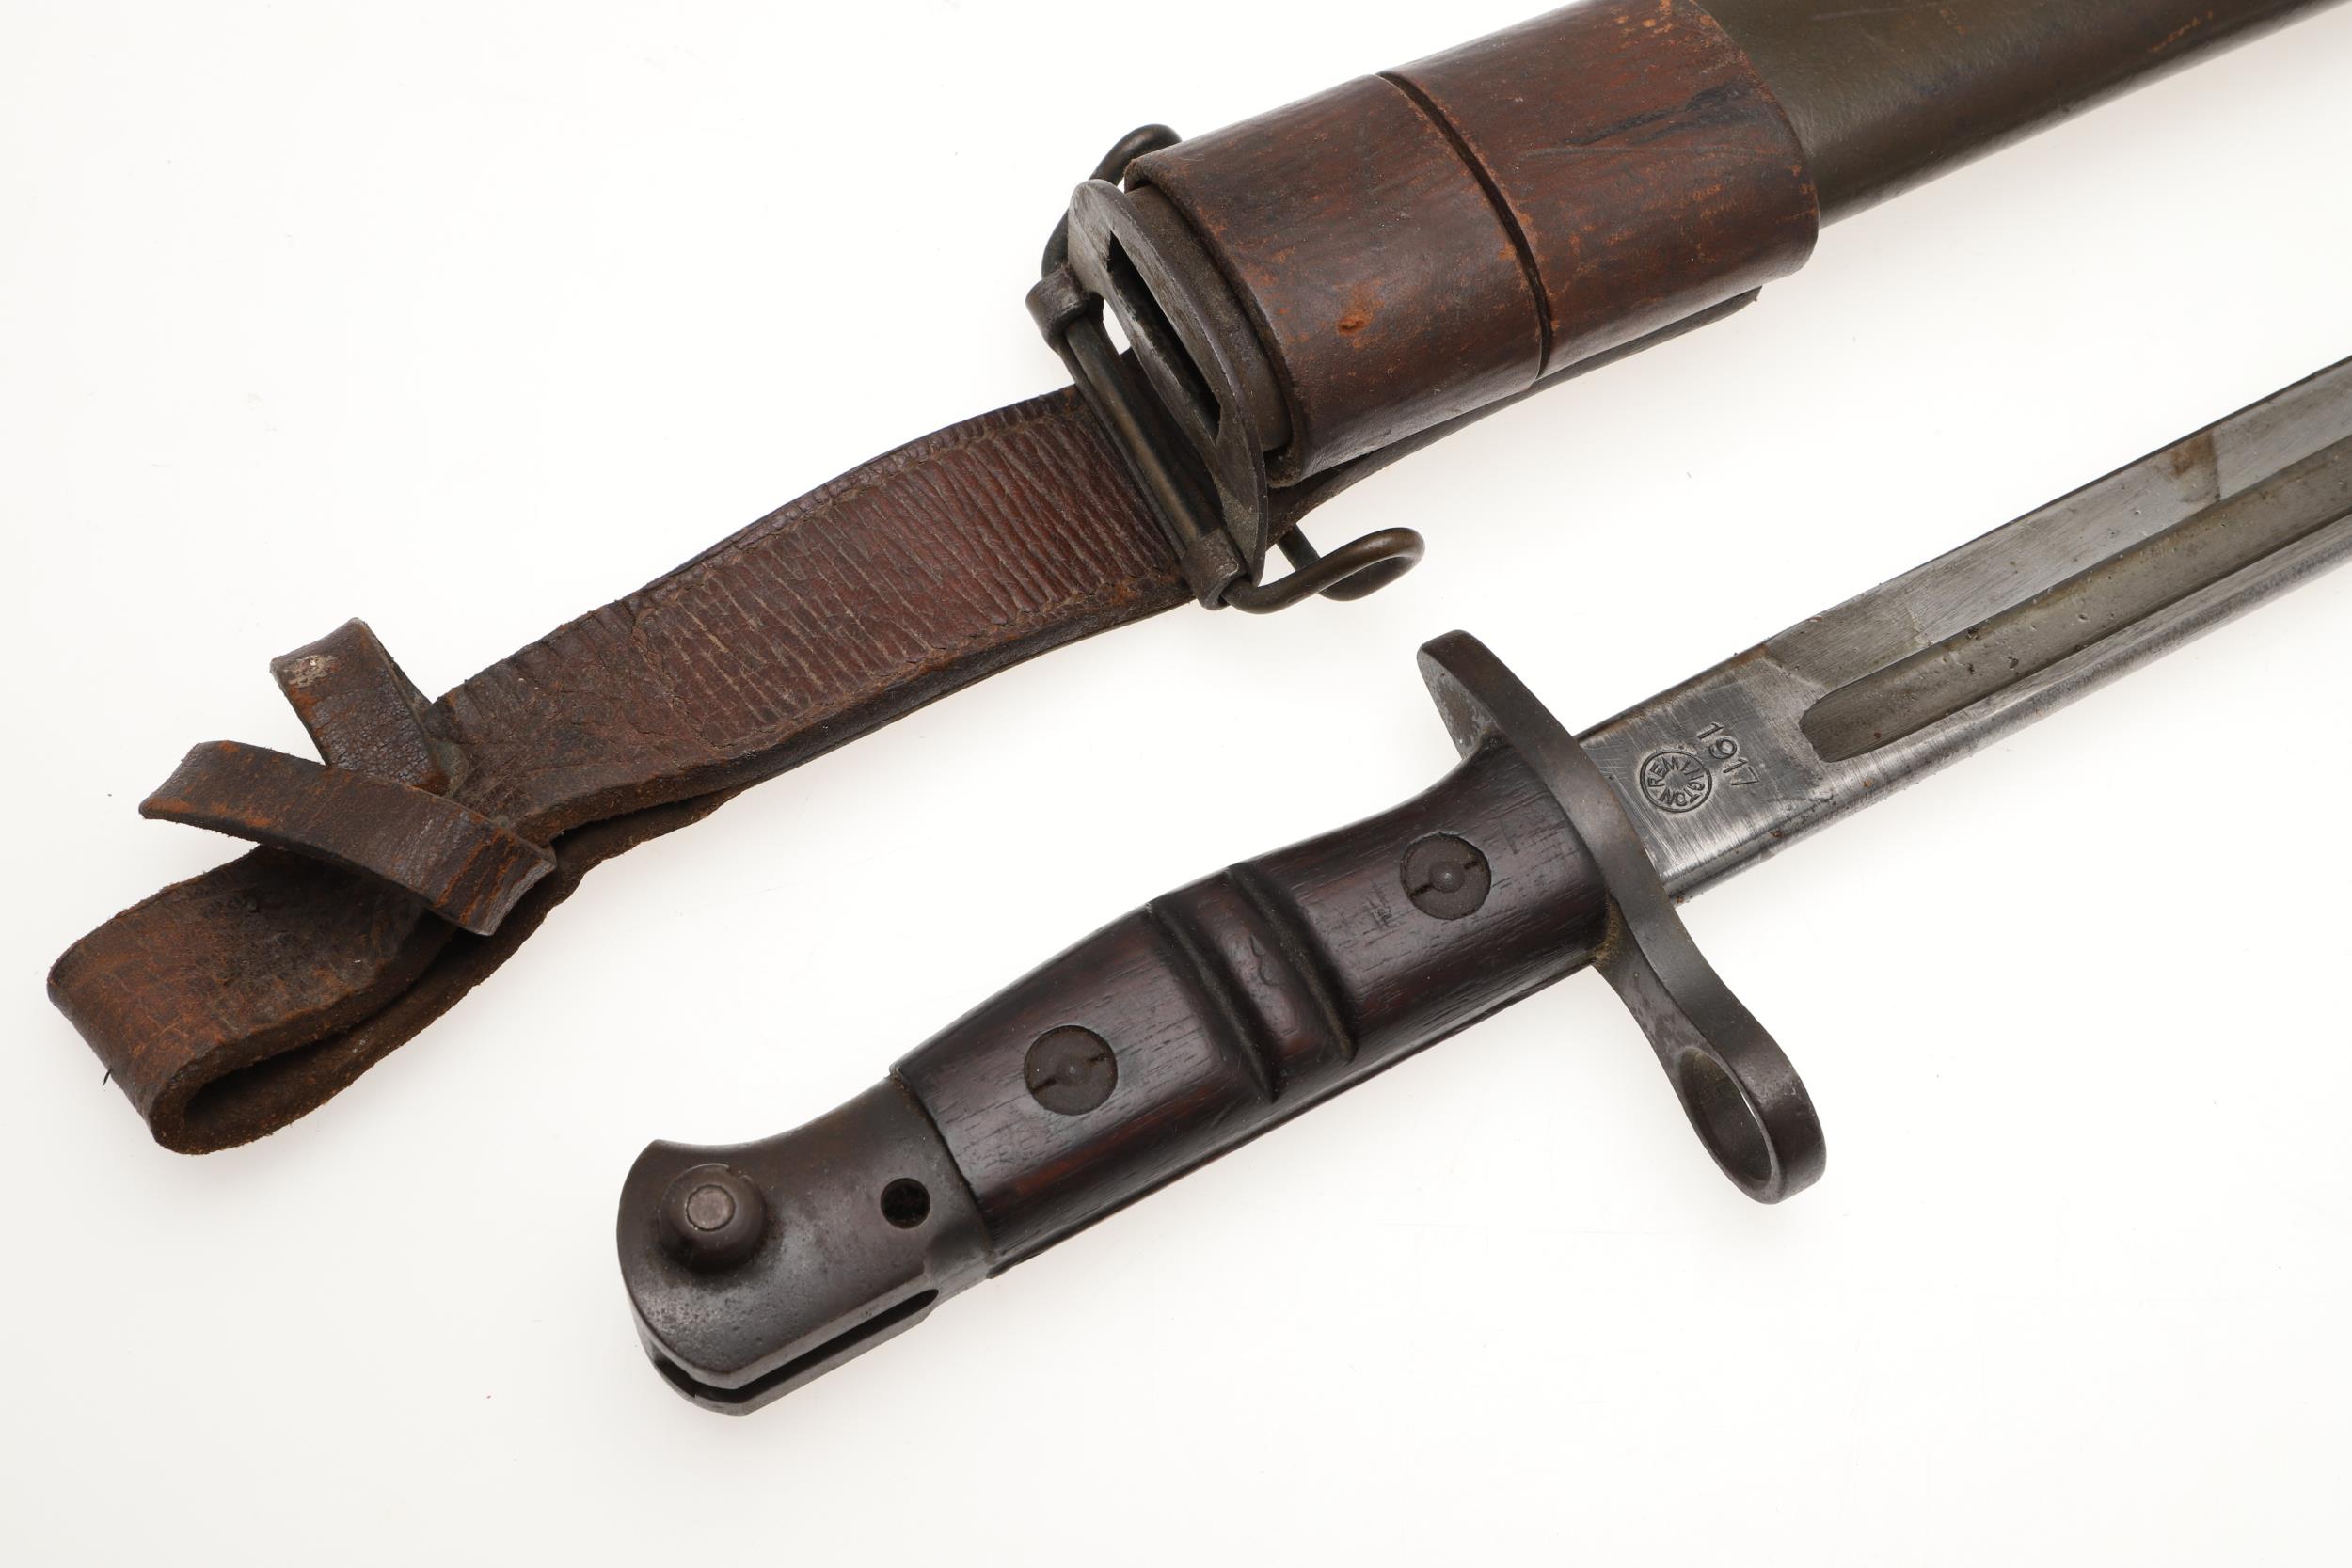 AN AMERICAN REMINGTON FIRST WORLD WAR 1917 PATTERN BAYONET AND SCABBARD. - Image 3 of 8